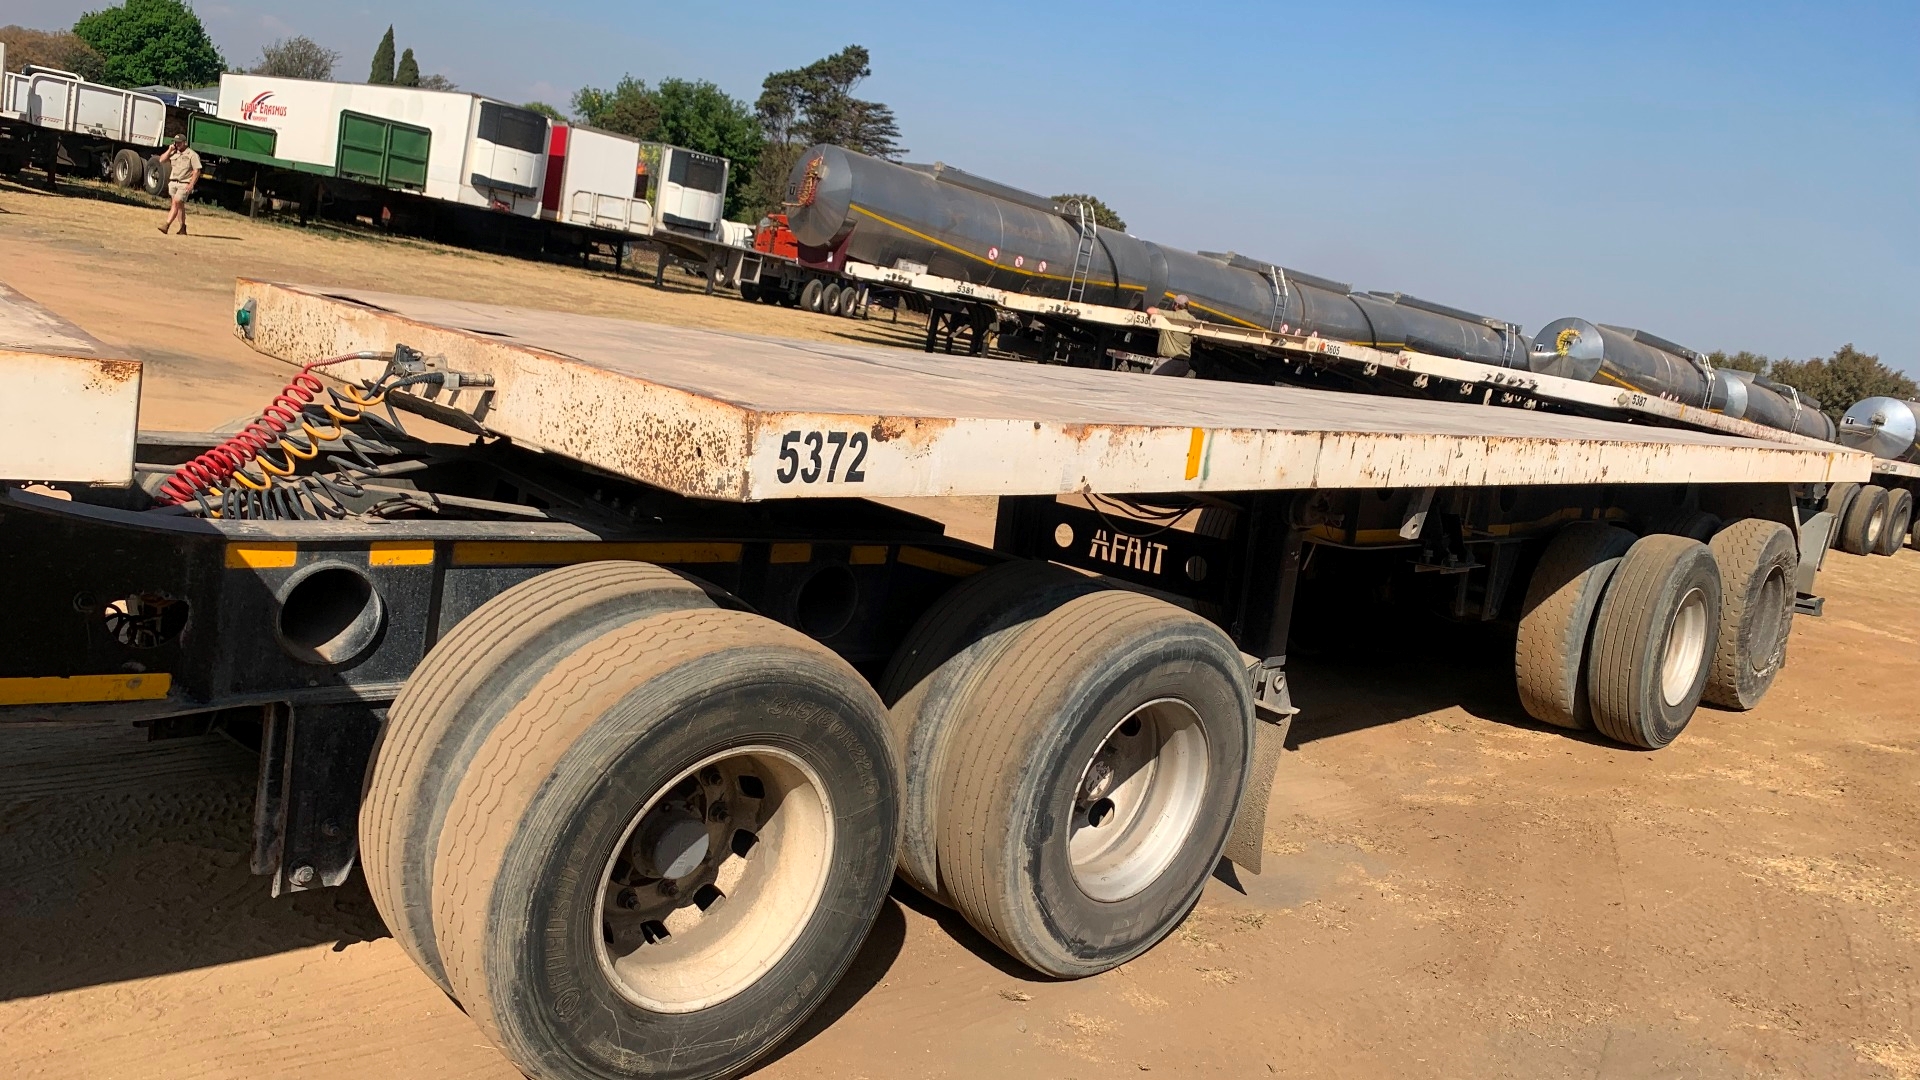 Afrit Trailers Stepdeck TRI AXLE 2016 for sale by Pomona Road Truck Sales | Truck & Trailer Marketplaces